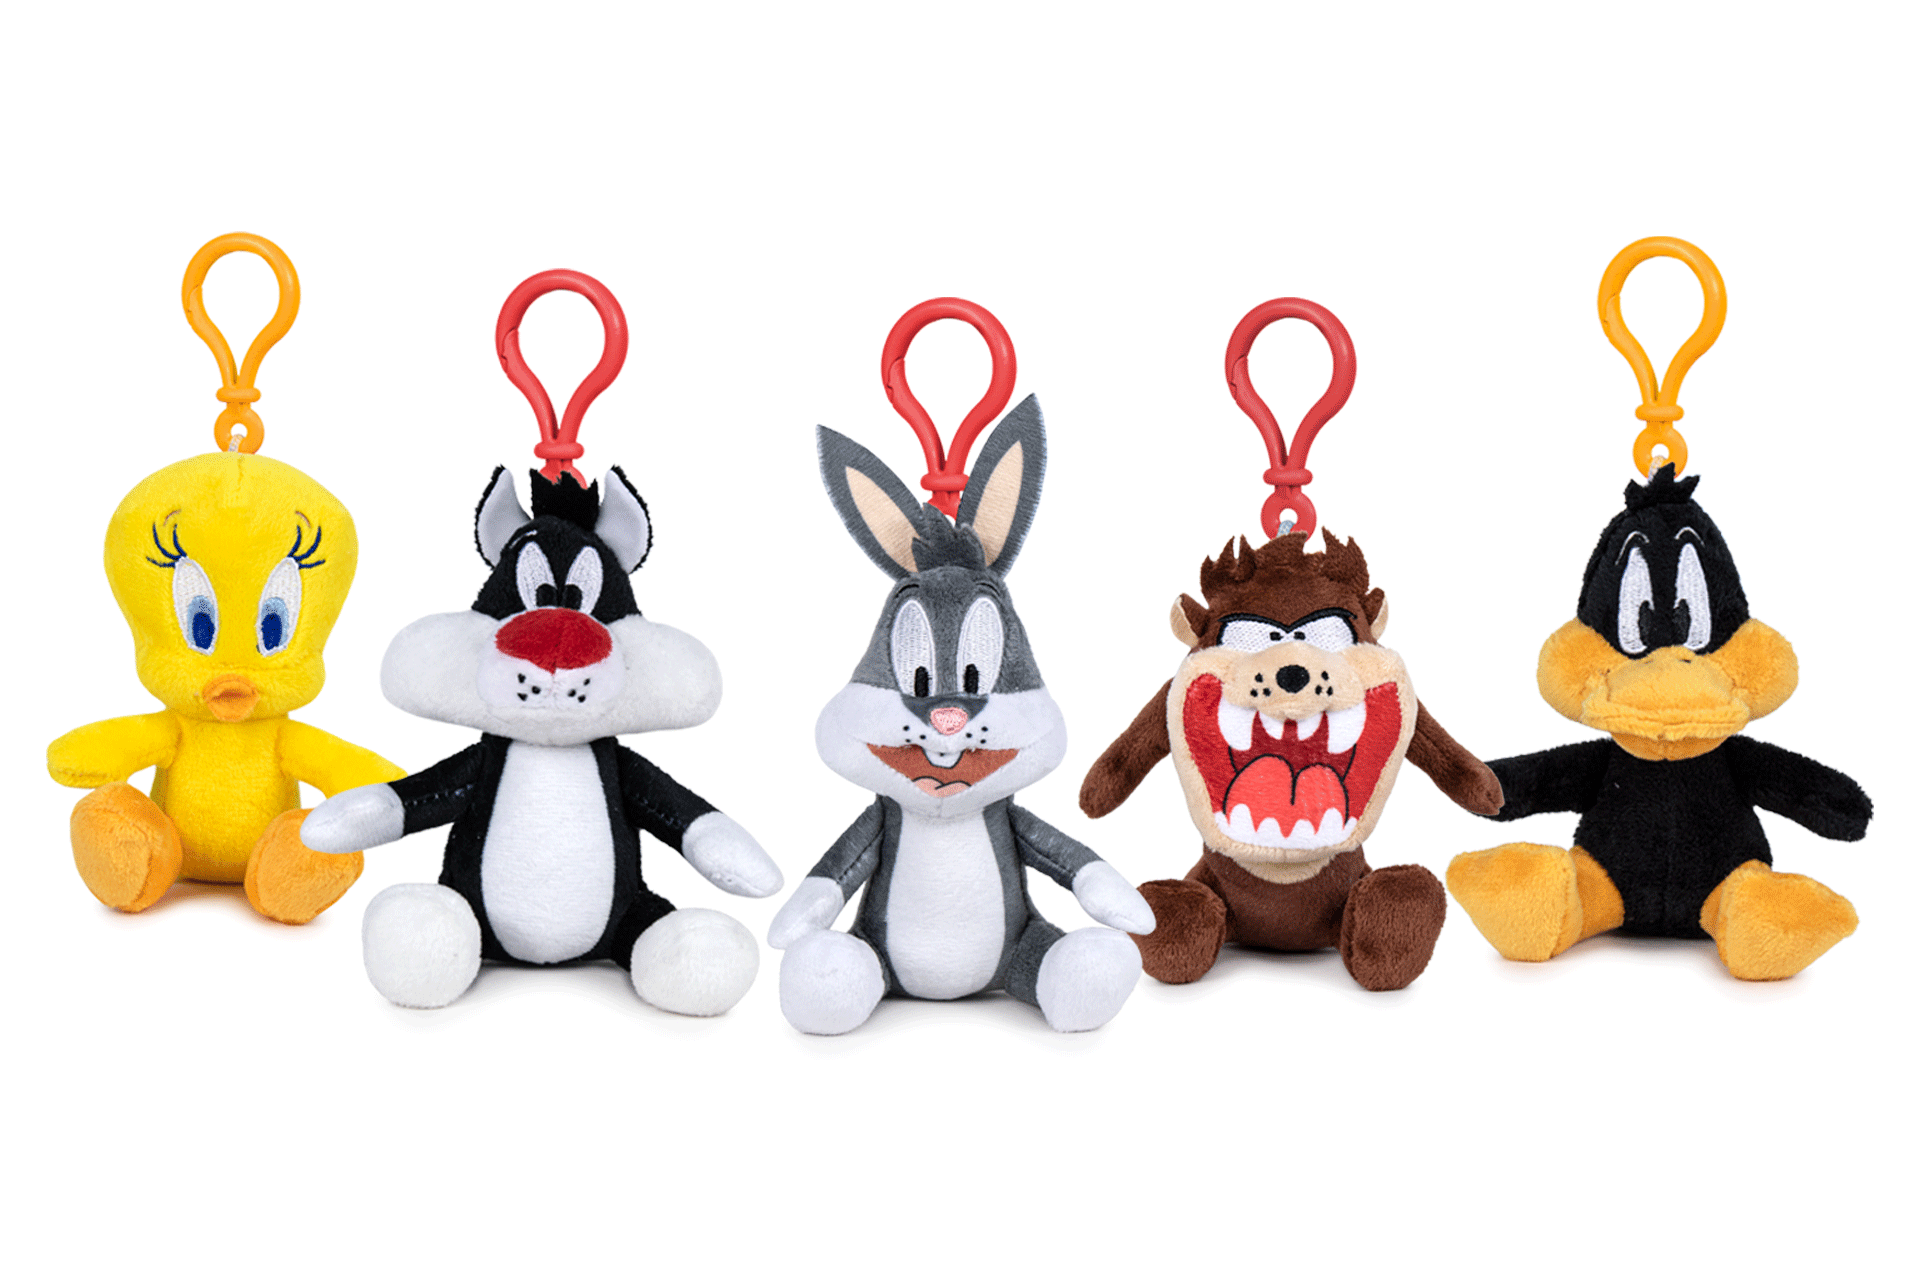 https://playbyplaytoys.es/wp-content/uploads/2022/02/760022359_looneytunes_keychains_warner_plushtoy.png